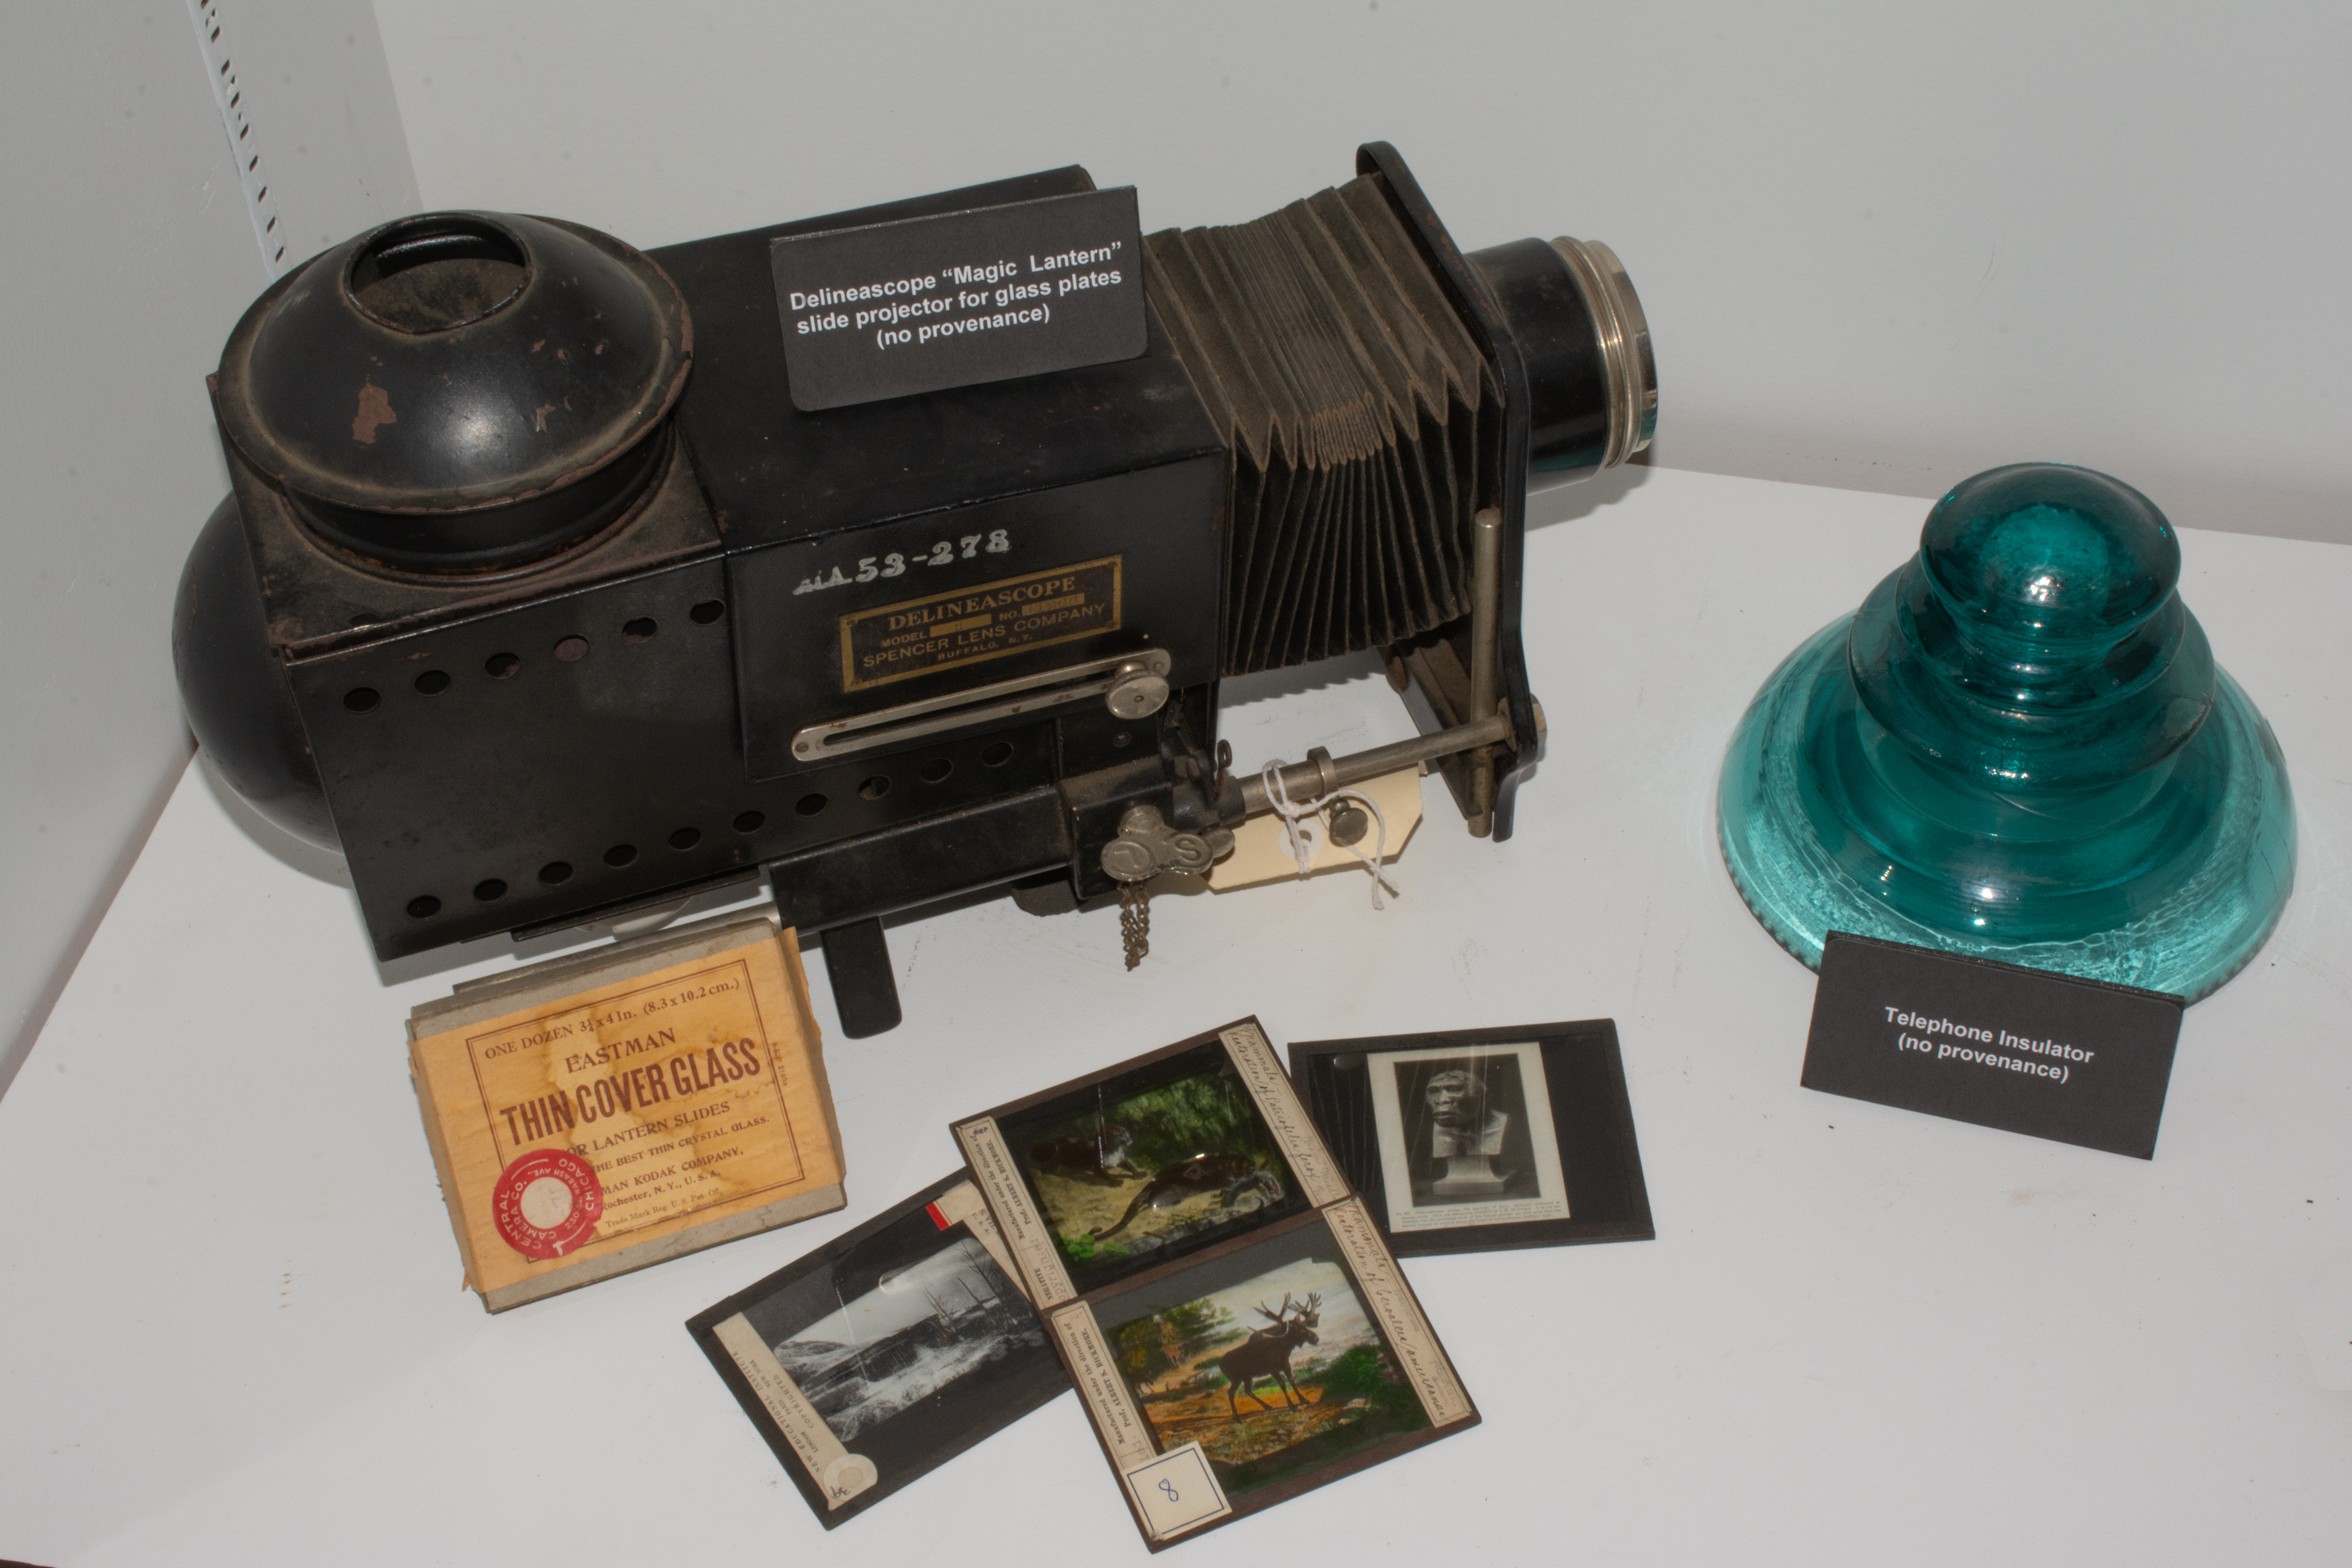 Delineascope 'Magic Lantern' slide projector for glass plates(left) and Telephone insulator(right)